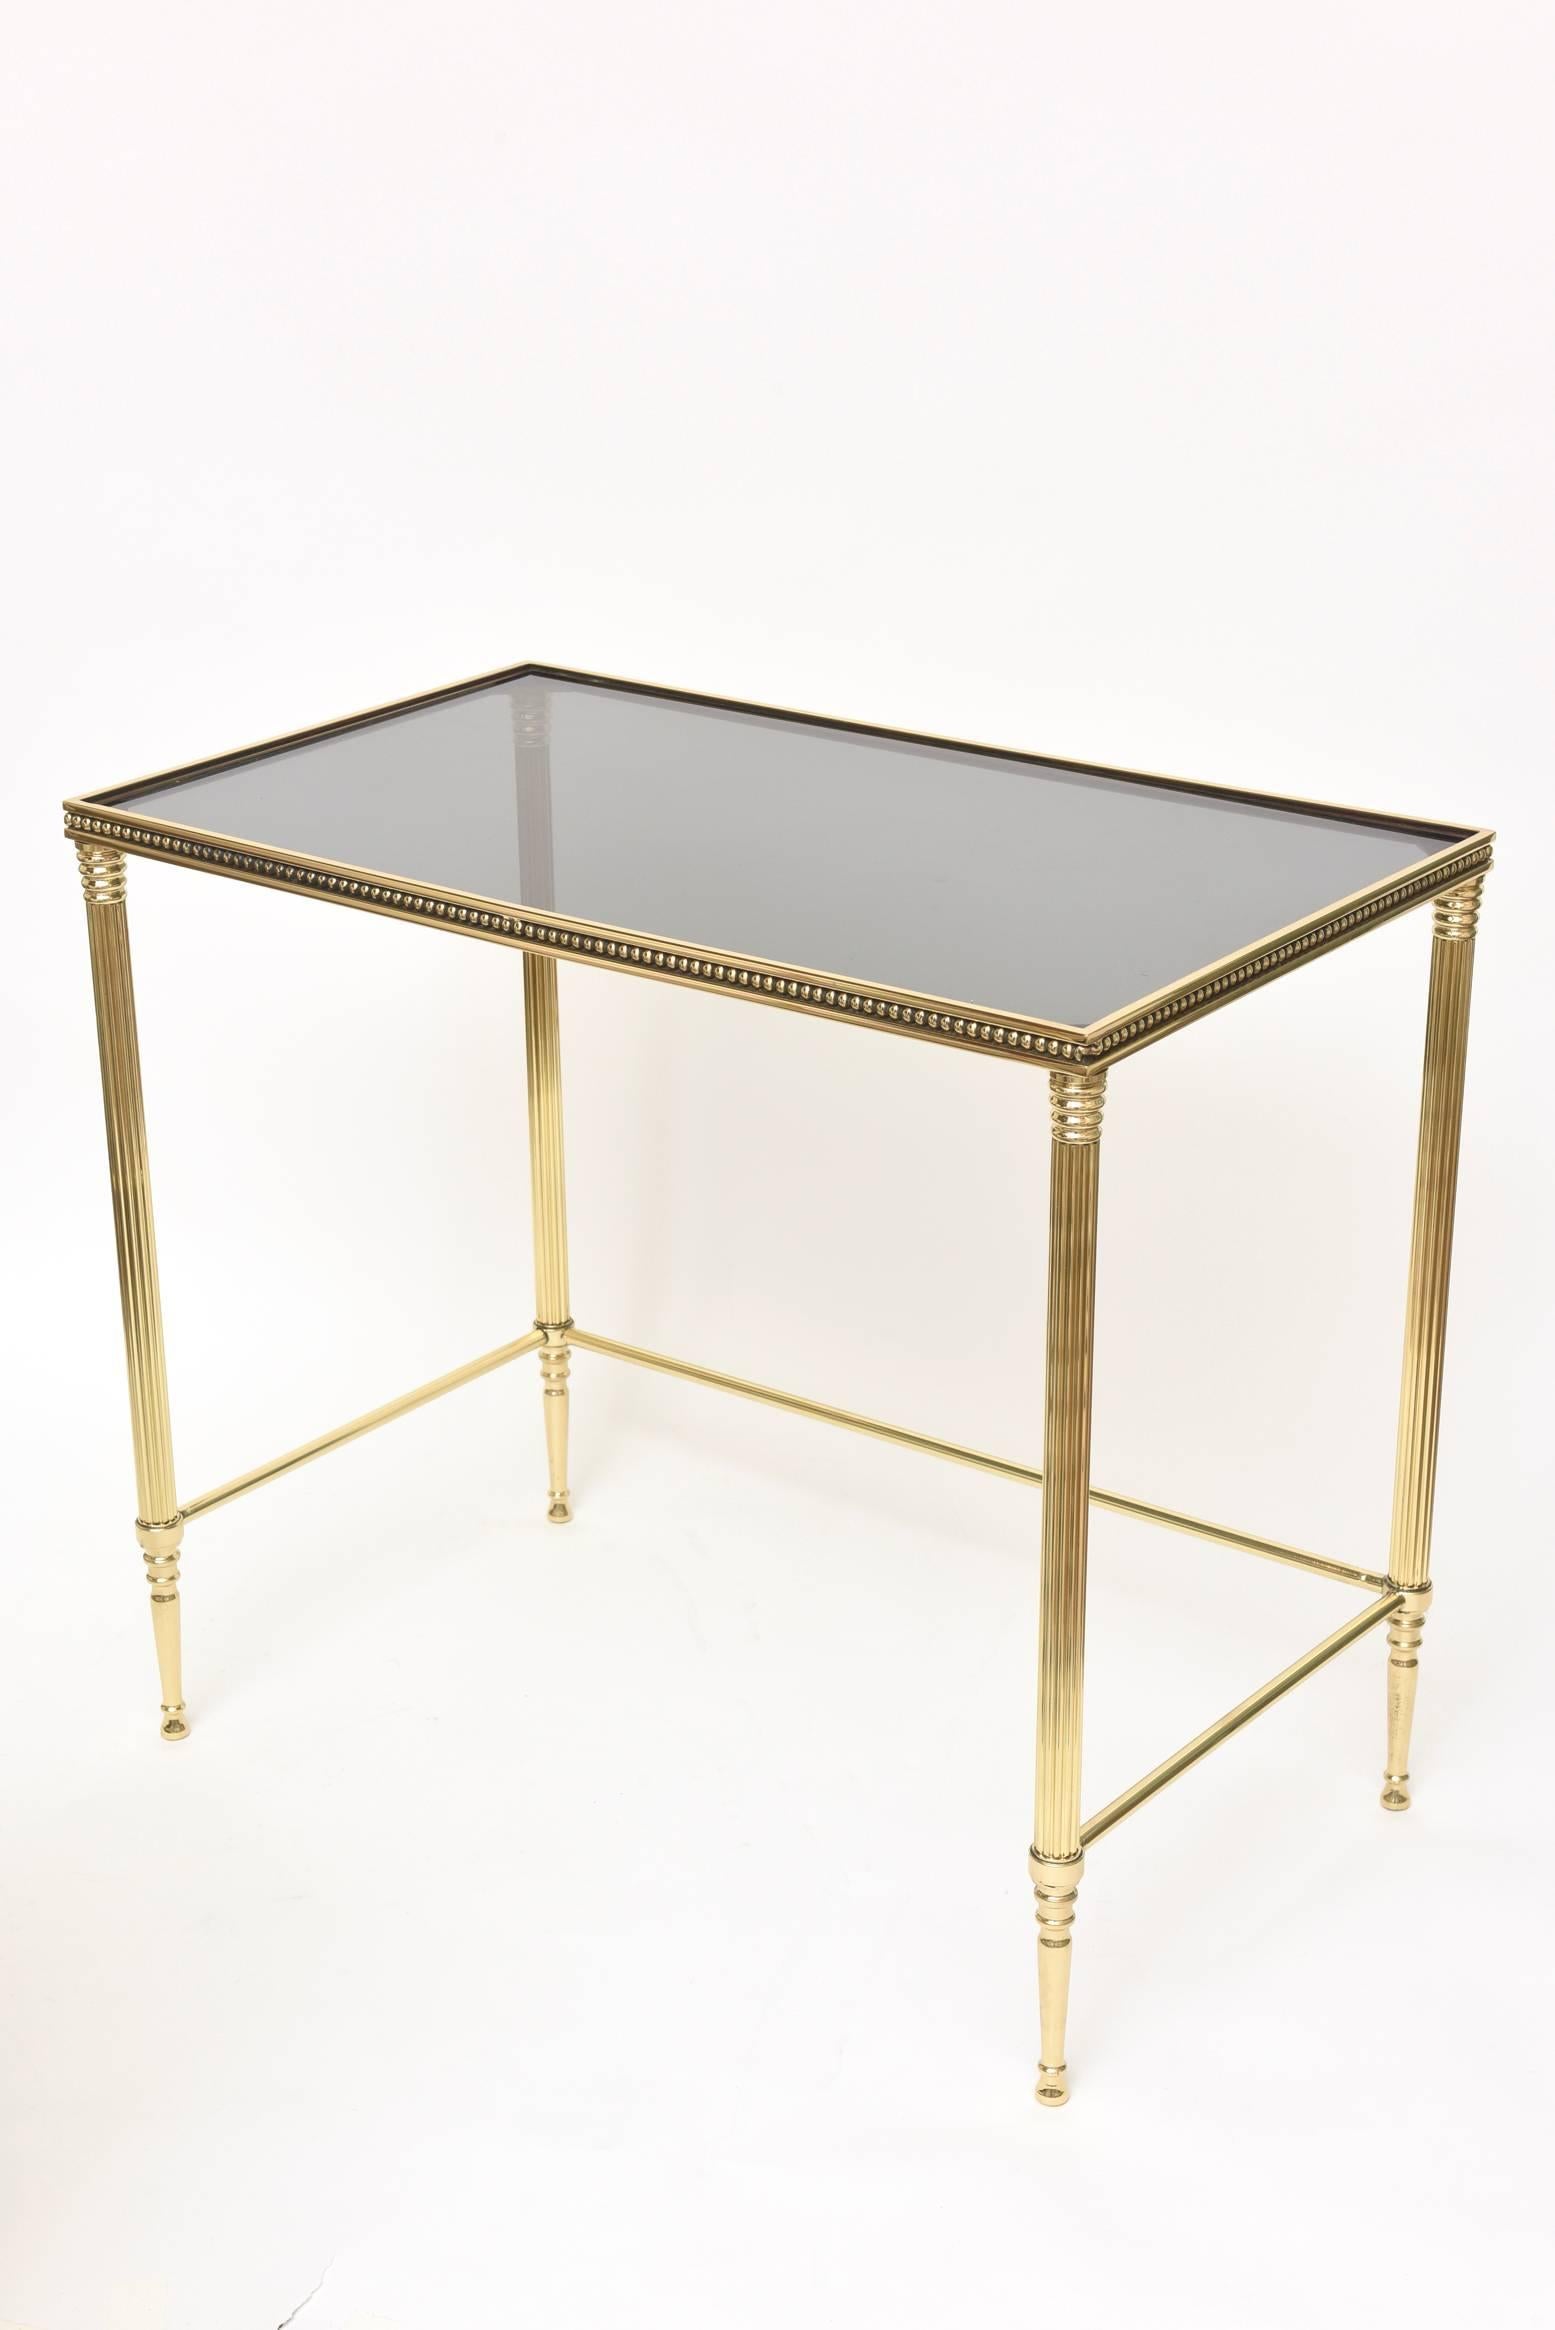 Set of Three Mid-Century Italian Polished Brass and Glass Nesting Tables /SALE 1